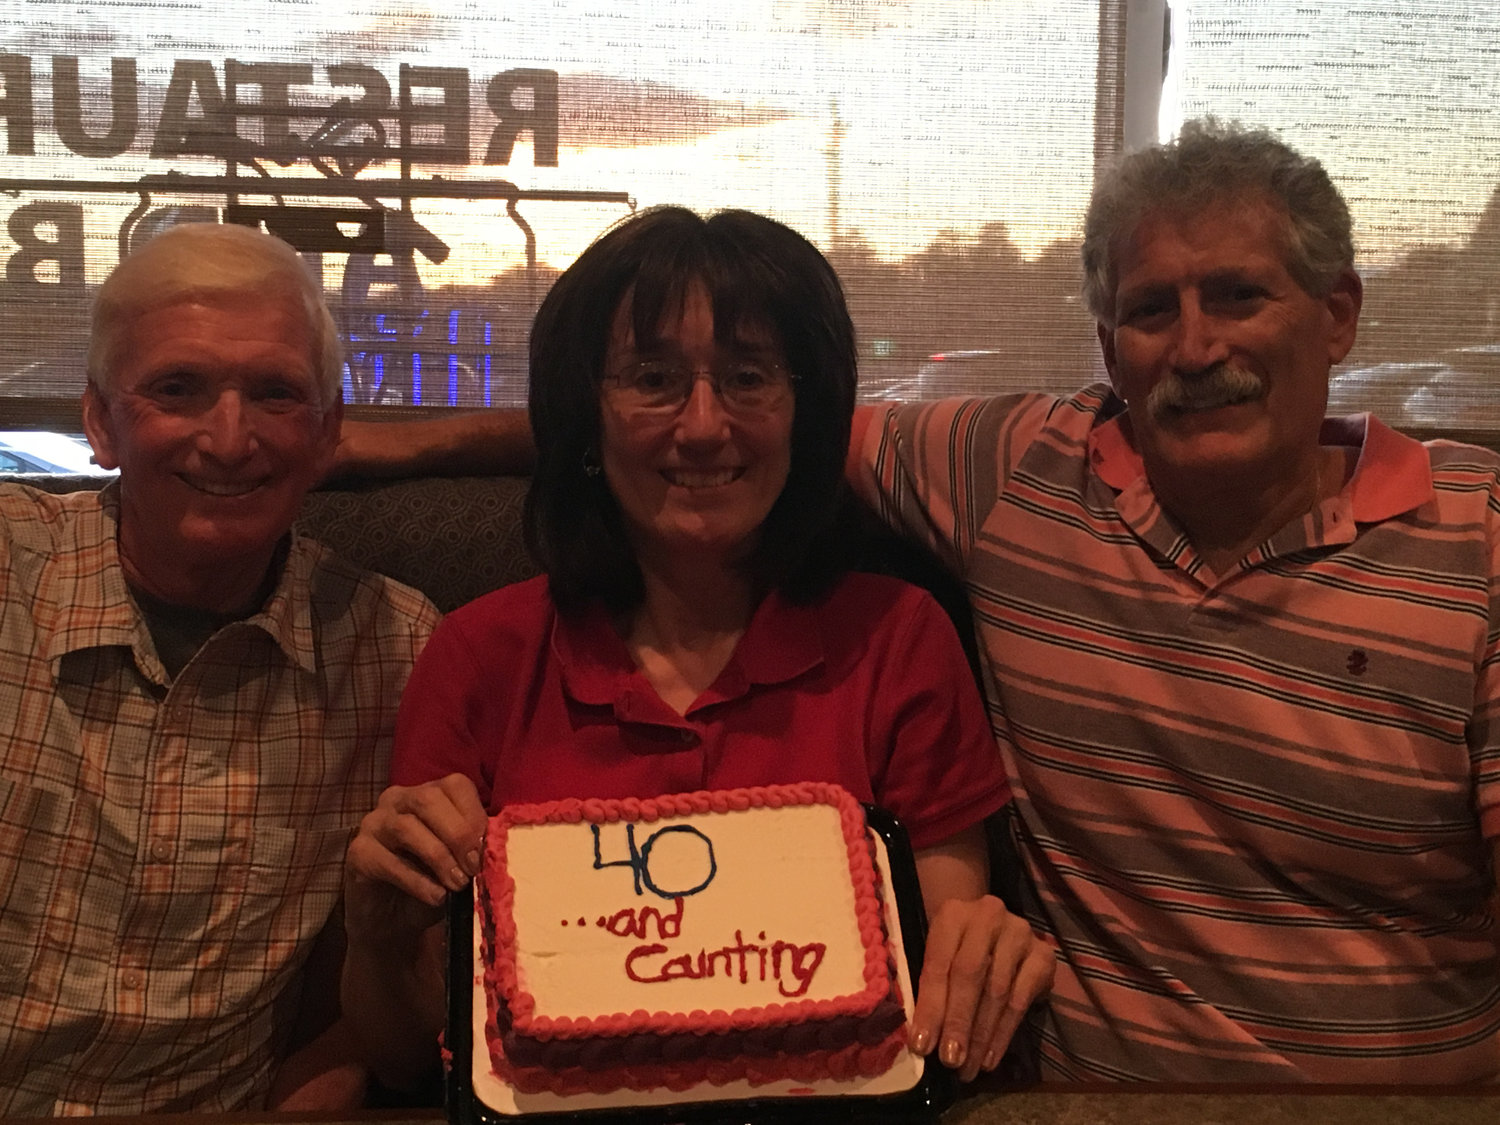 Mary-Pat Ezzo, center, along with Mark Fite, left, and Larry Waldman, all celebrated a major milestone four years ago. Now Ezzo is shooting for 45 straight PDRs on Sept. 18.